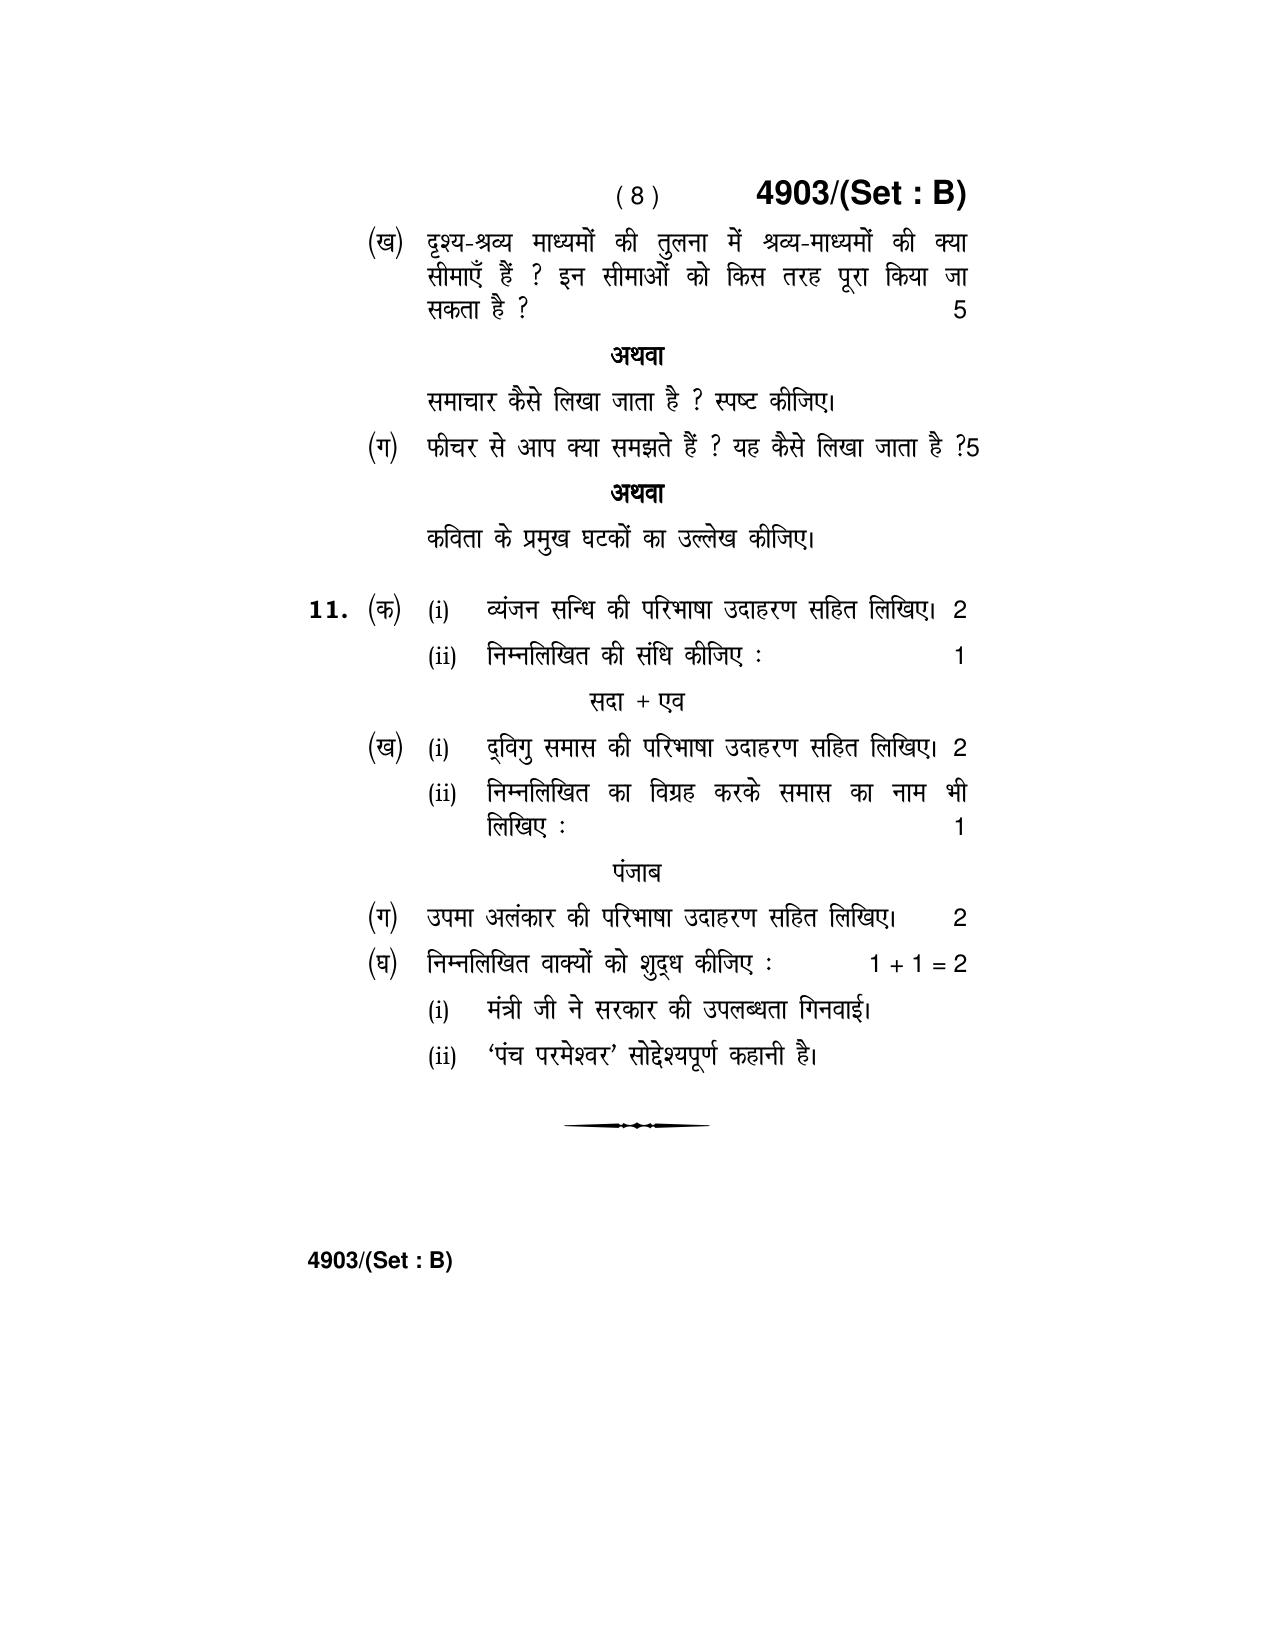 Haryana Board HBSE Class 12 Hindi Core 2020 Question Paper - Page 16